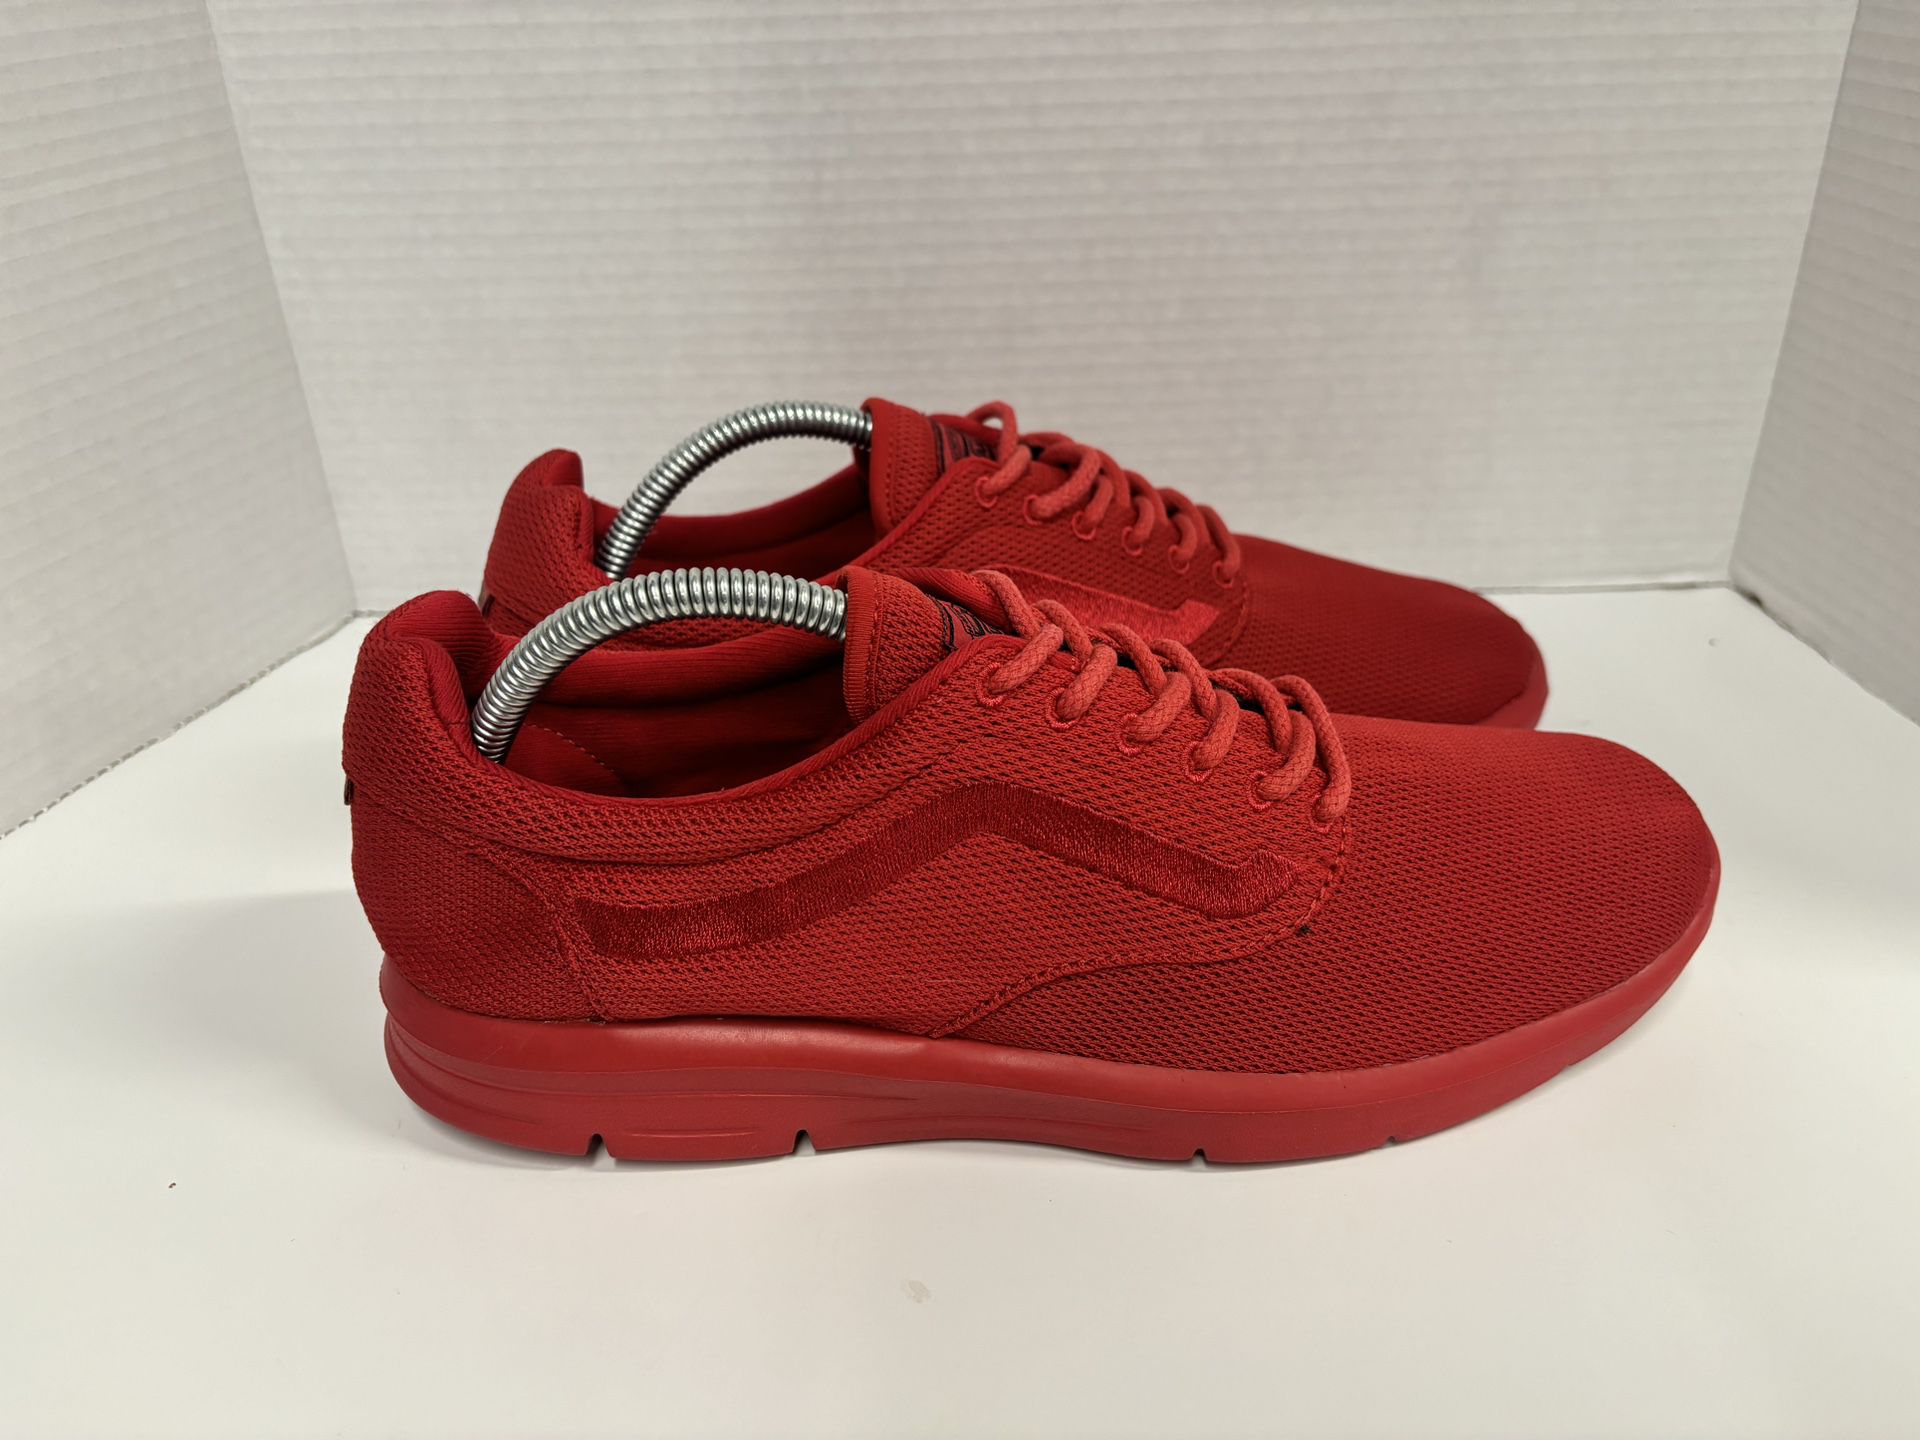 Vans Iso 1.5 + Mesh Mono Red Ultracush VN0A2Z5JL2 Mens size 10 skate shoes